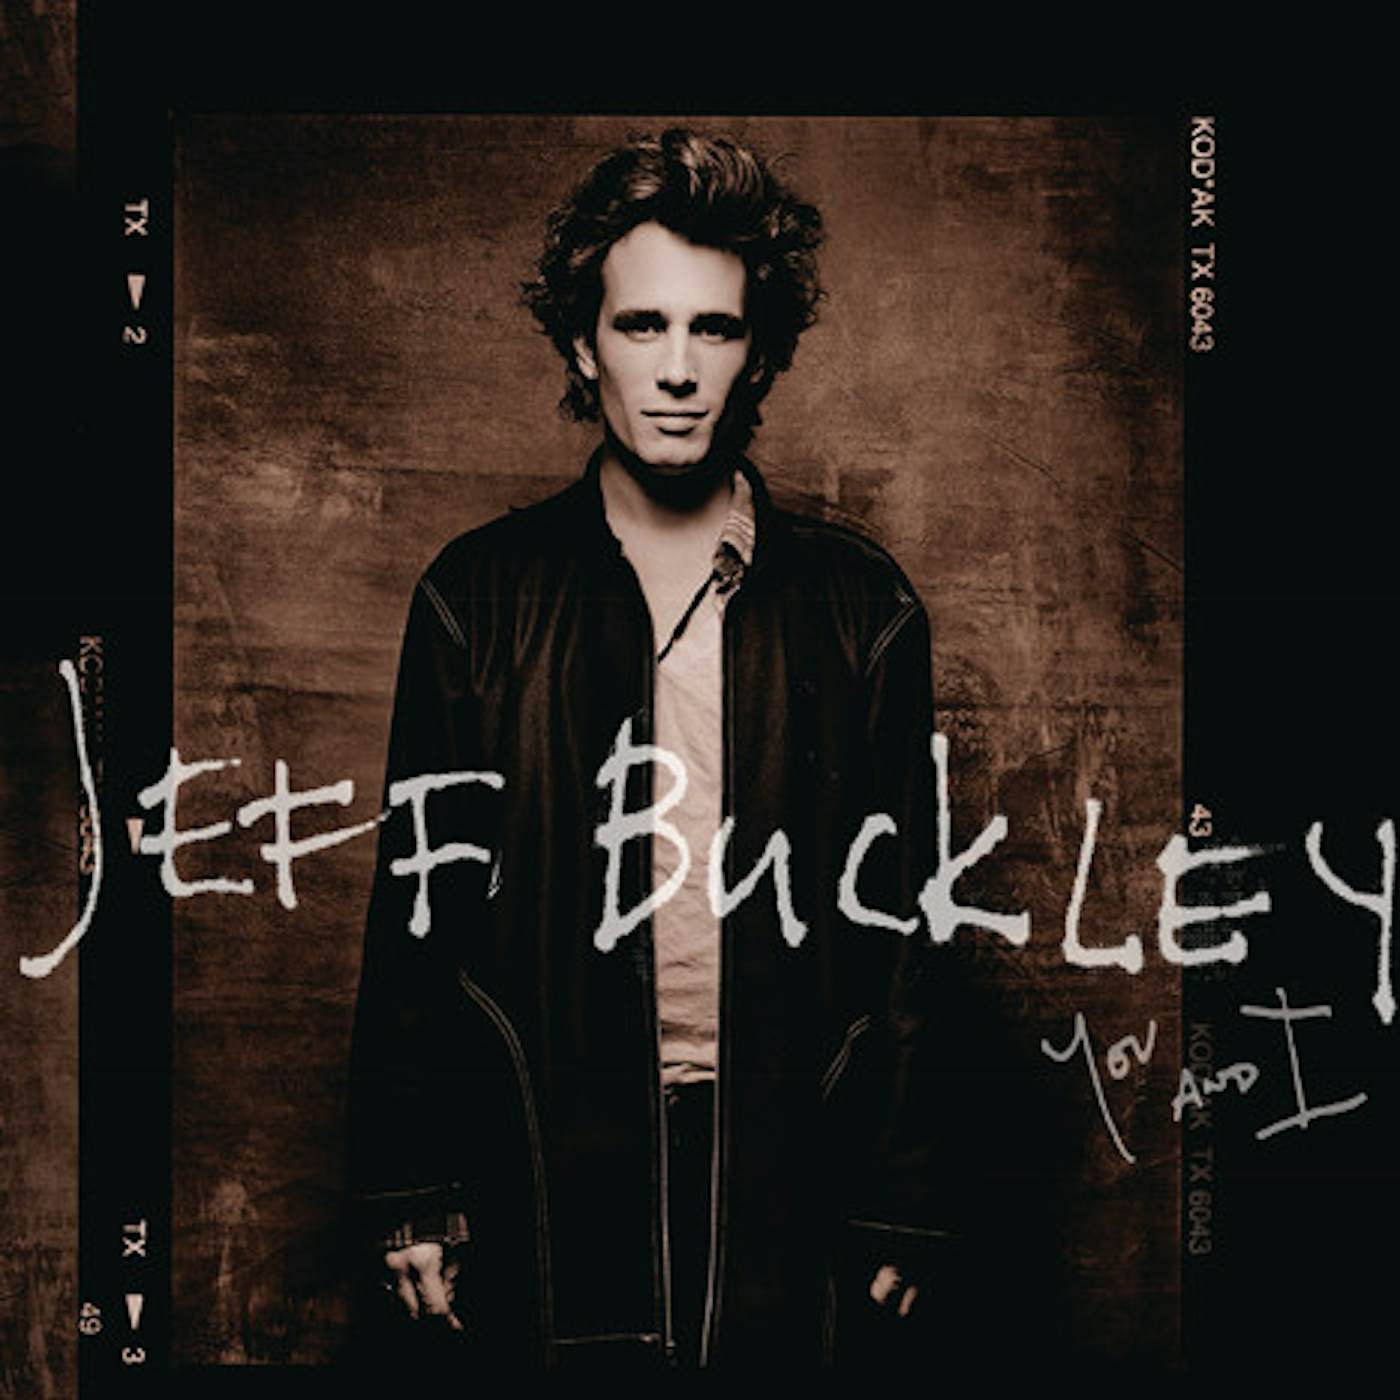 Jeff Buckley You and I Vinyl Record